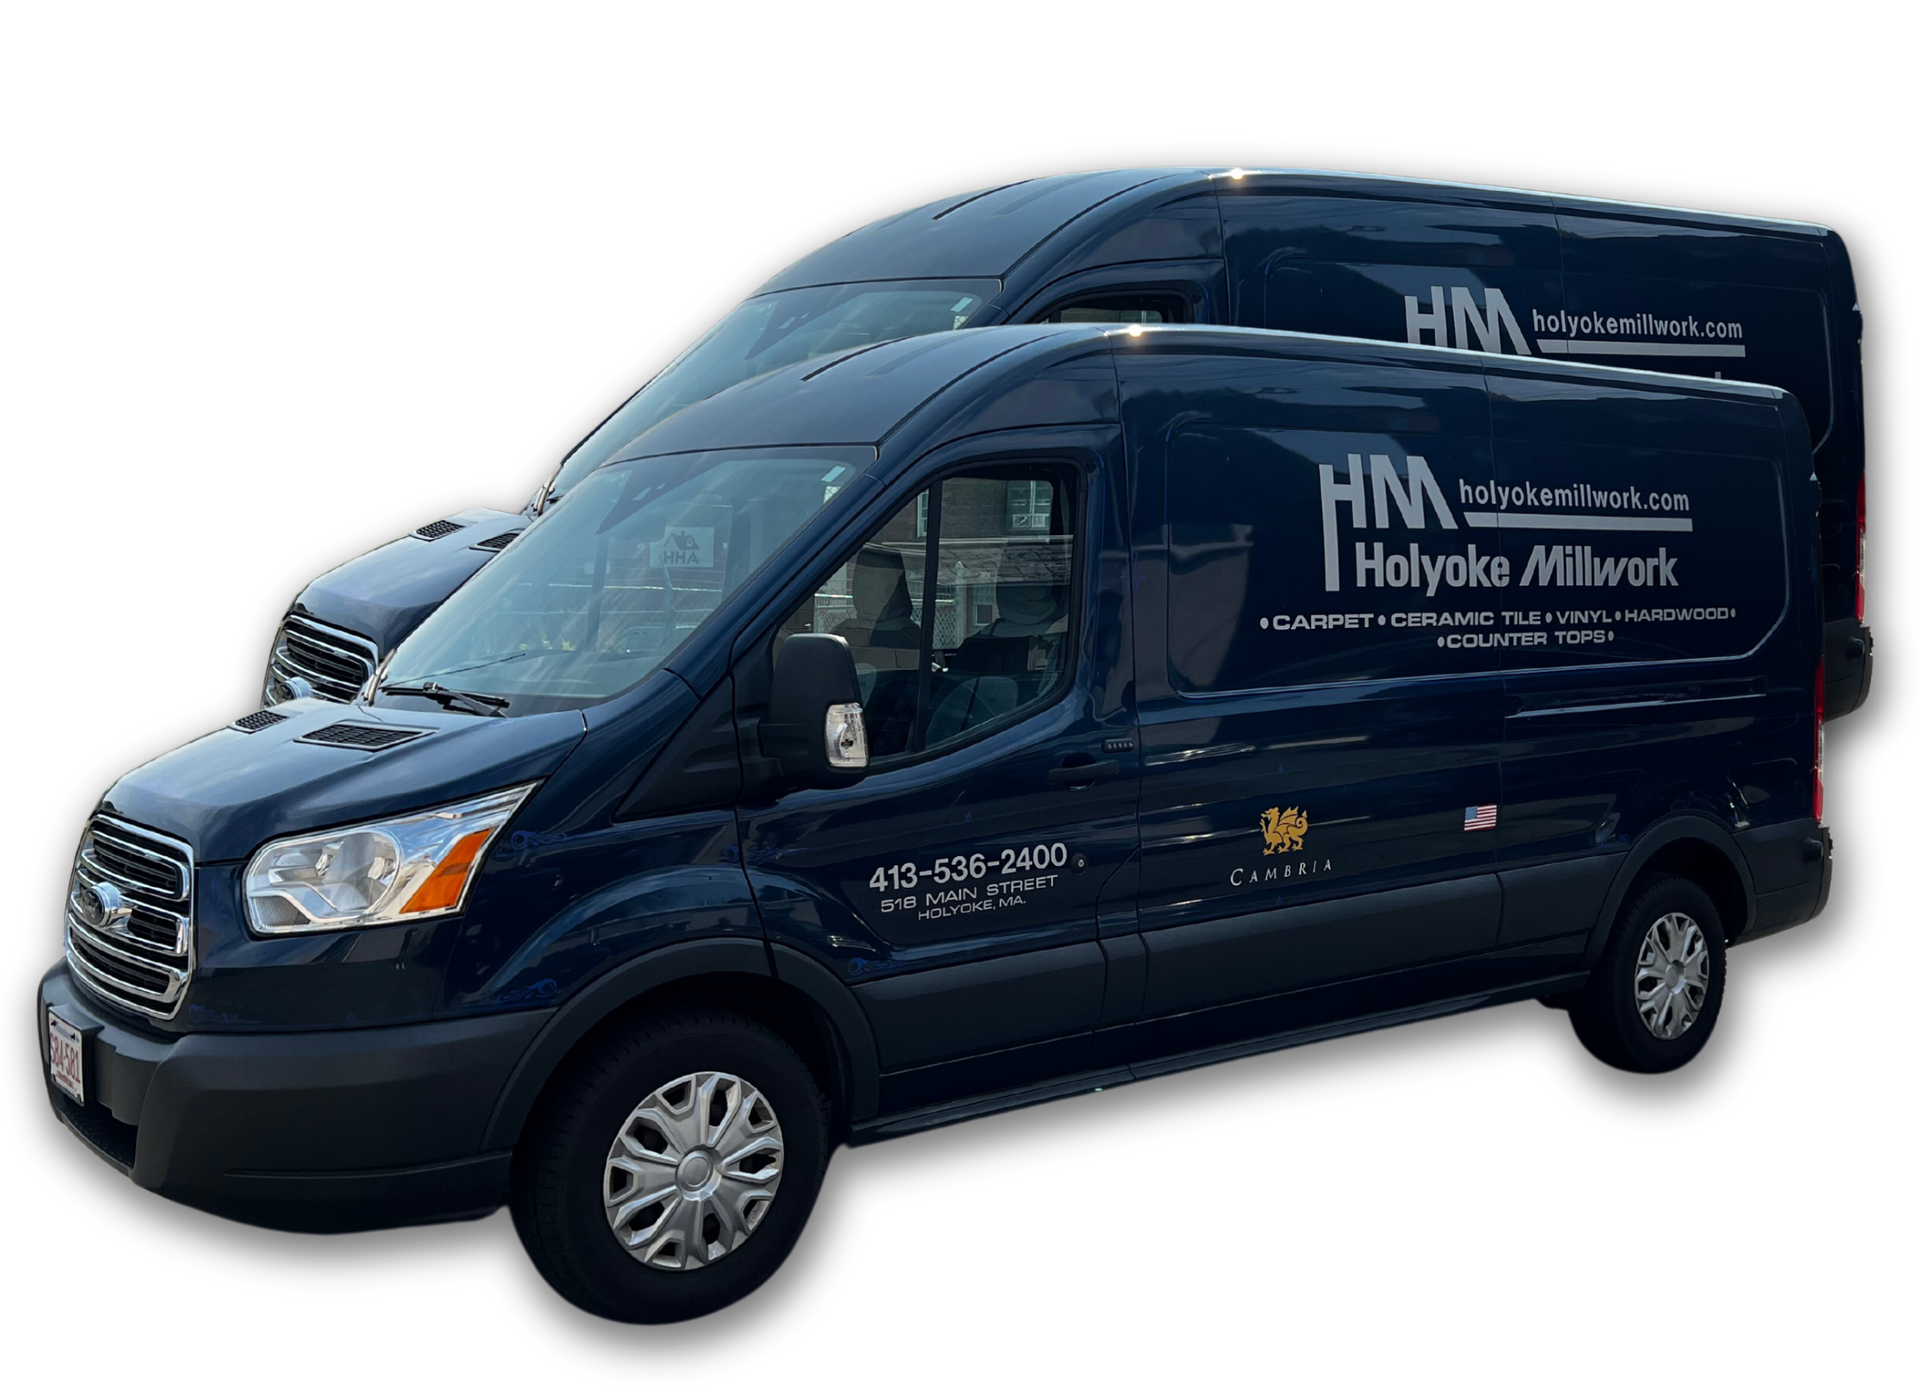 a navy blue van says holyoke millwork on the side